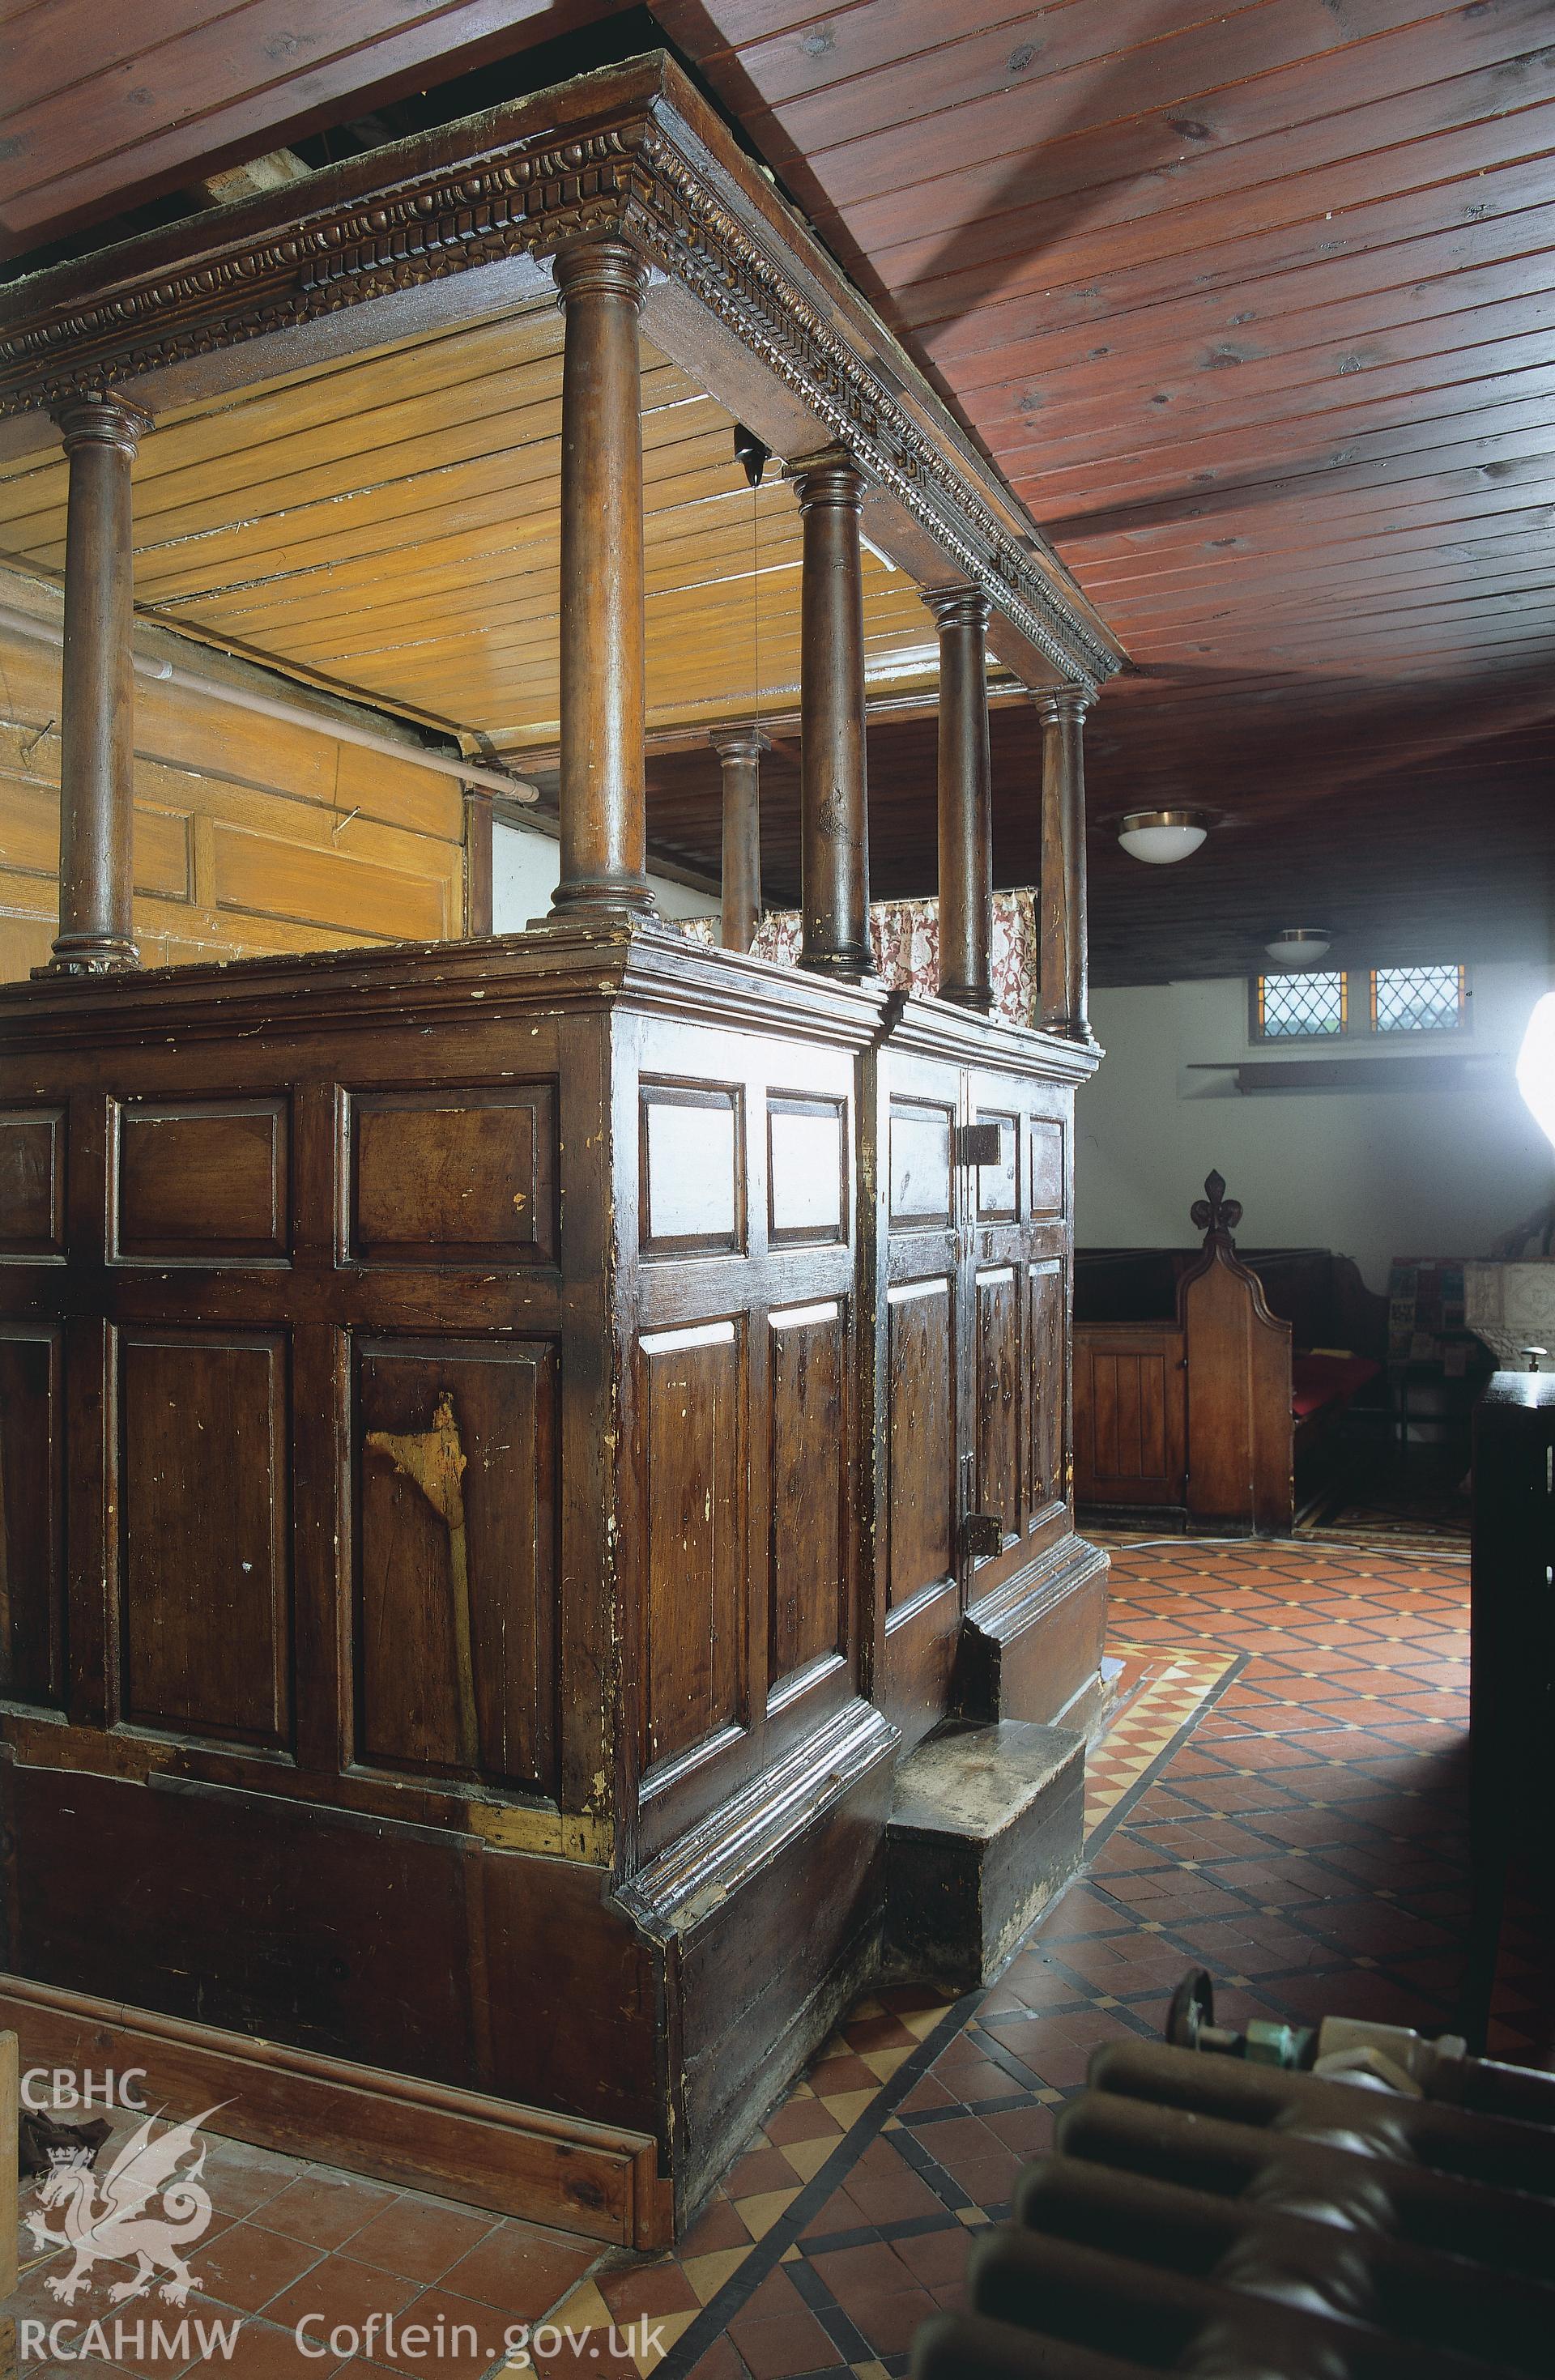 RCAHMW colour transparency showing Faculty Pew, St Peter's Church, Carmarthen.